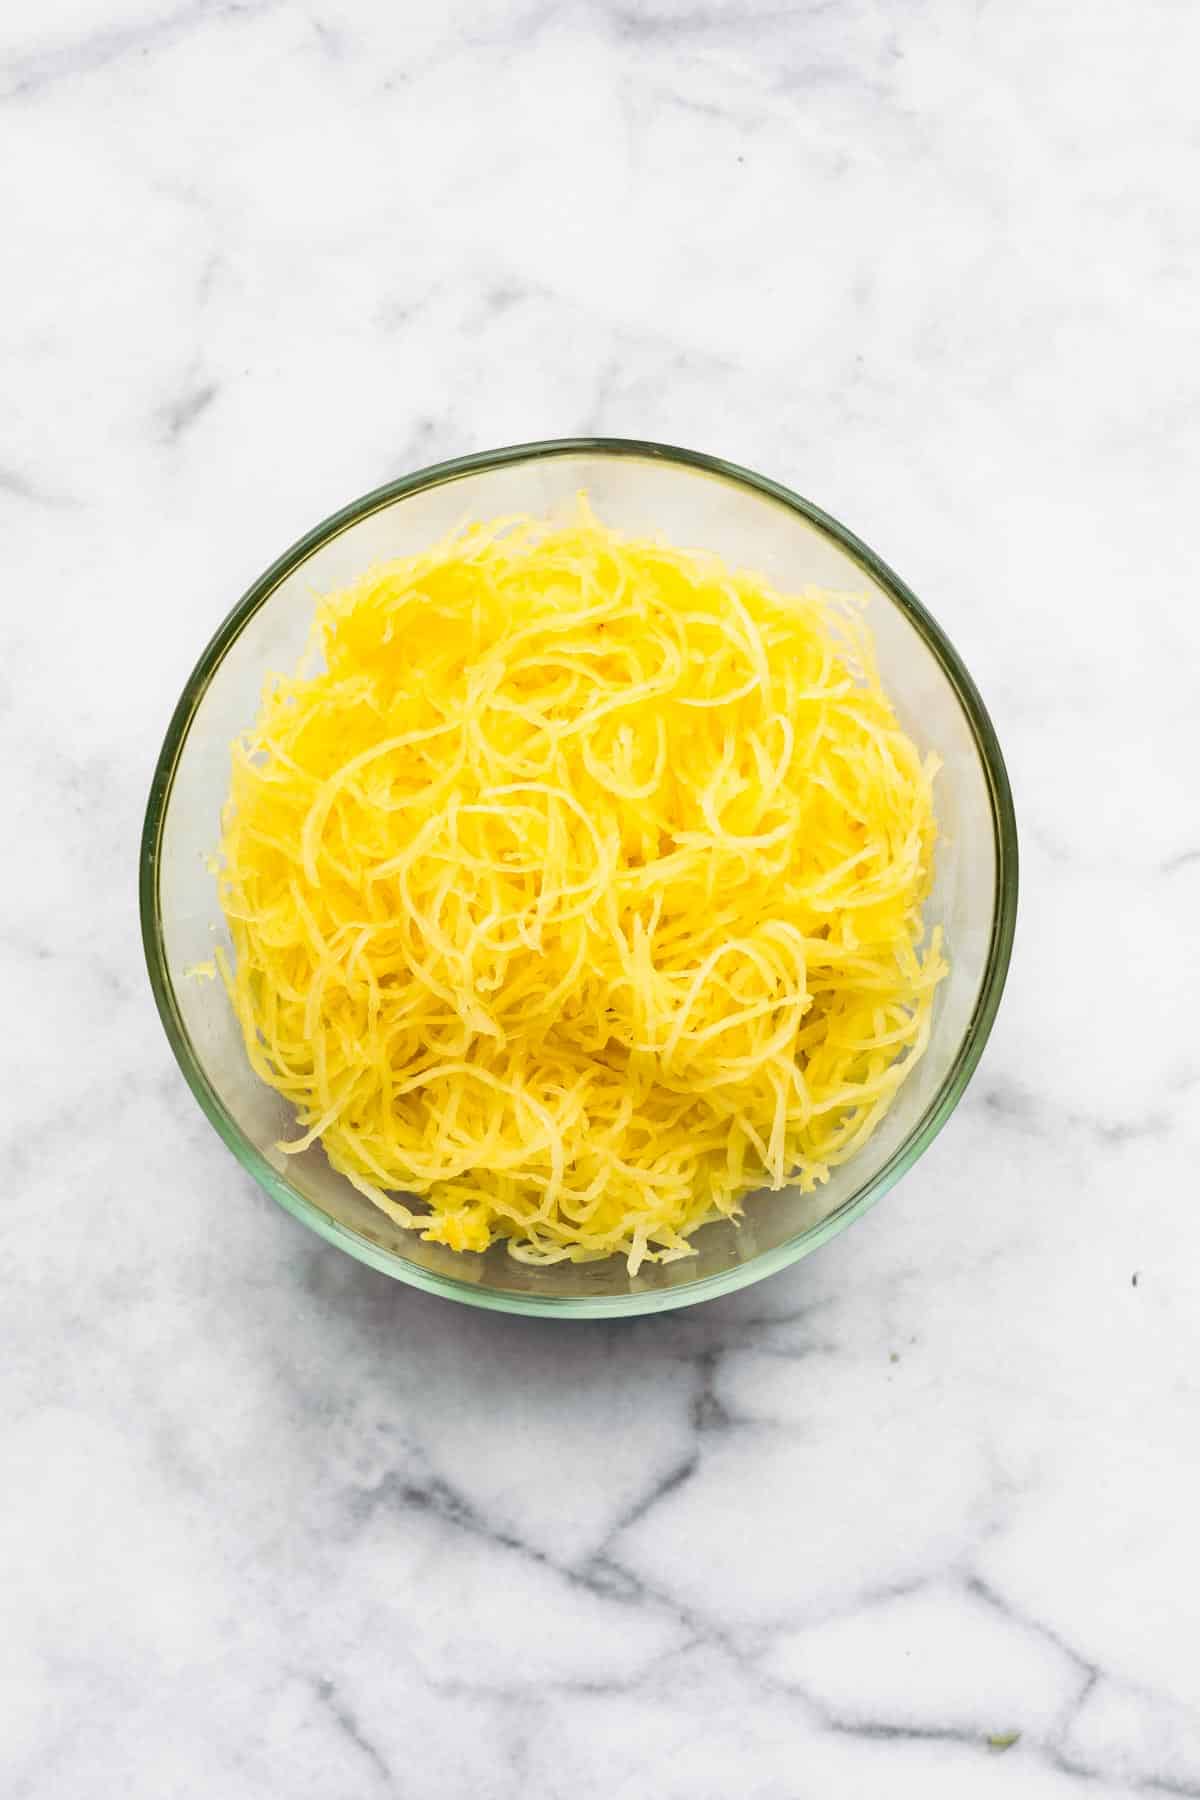 A glass bowl filled with spaghetti squash strands on a white marble countertop.